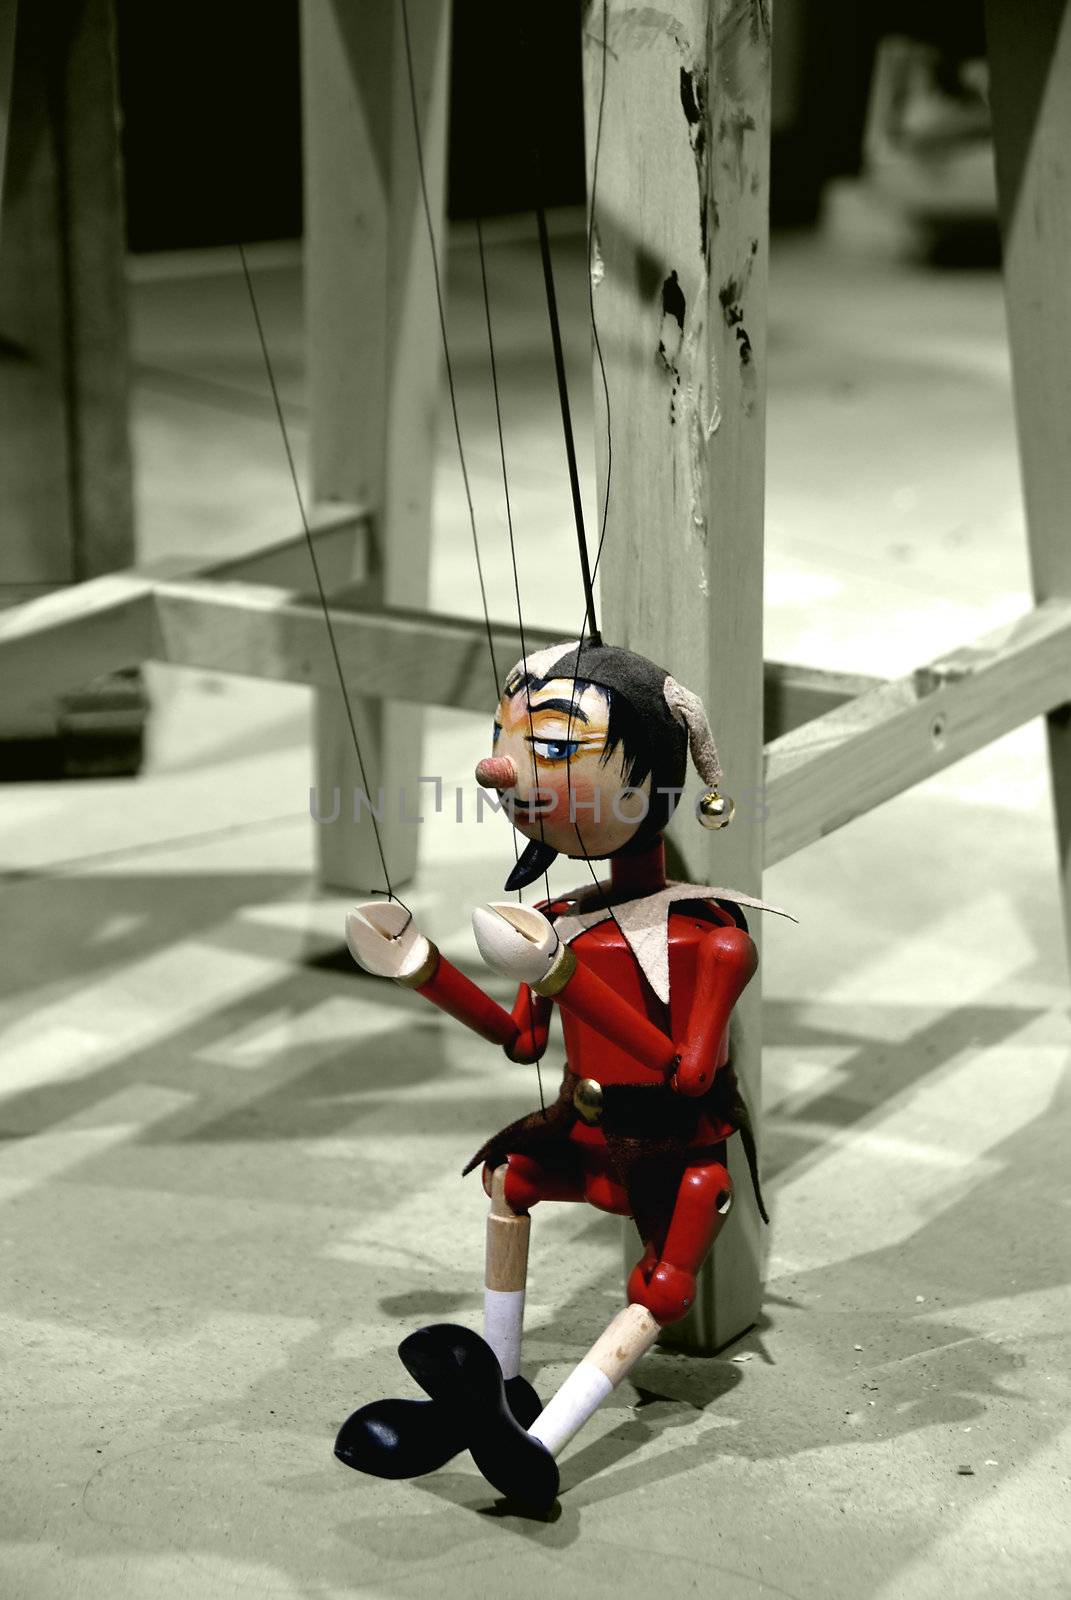 Wooden toy as marionette